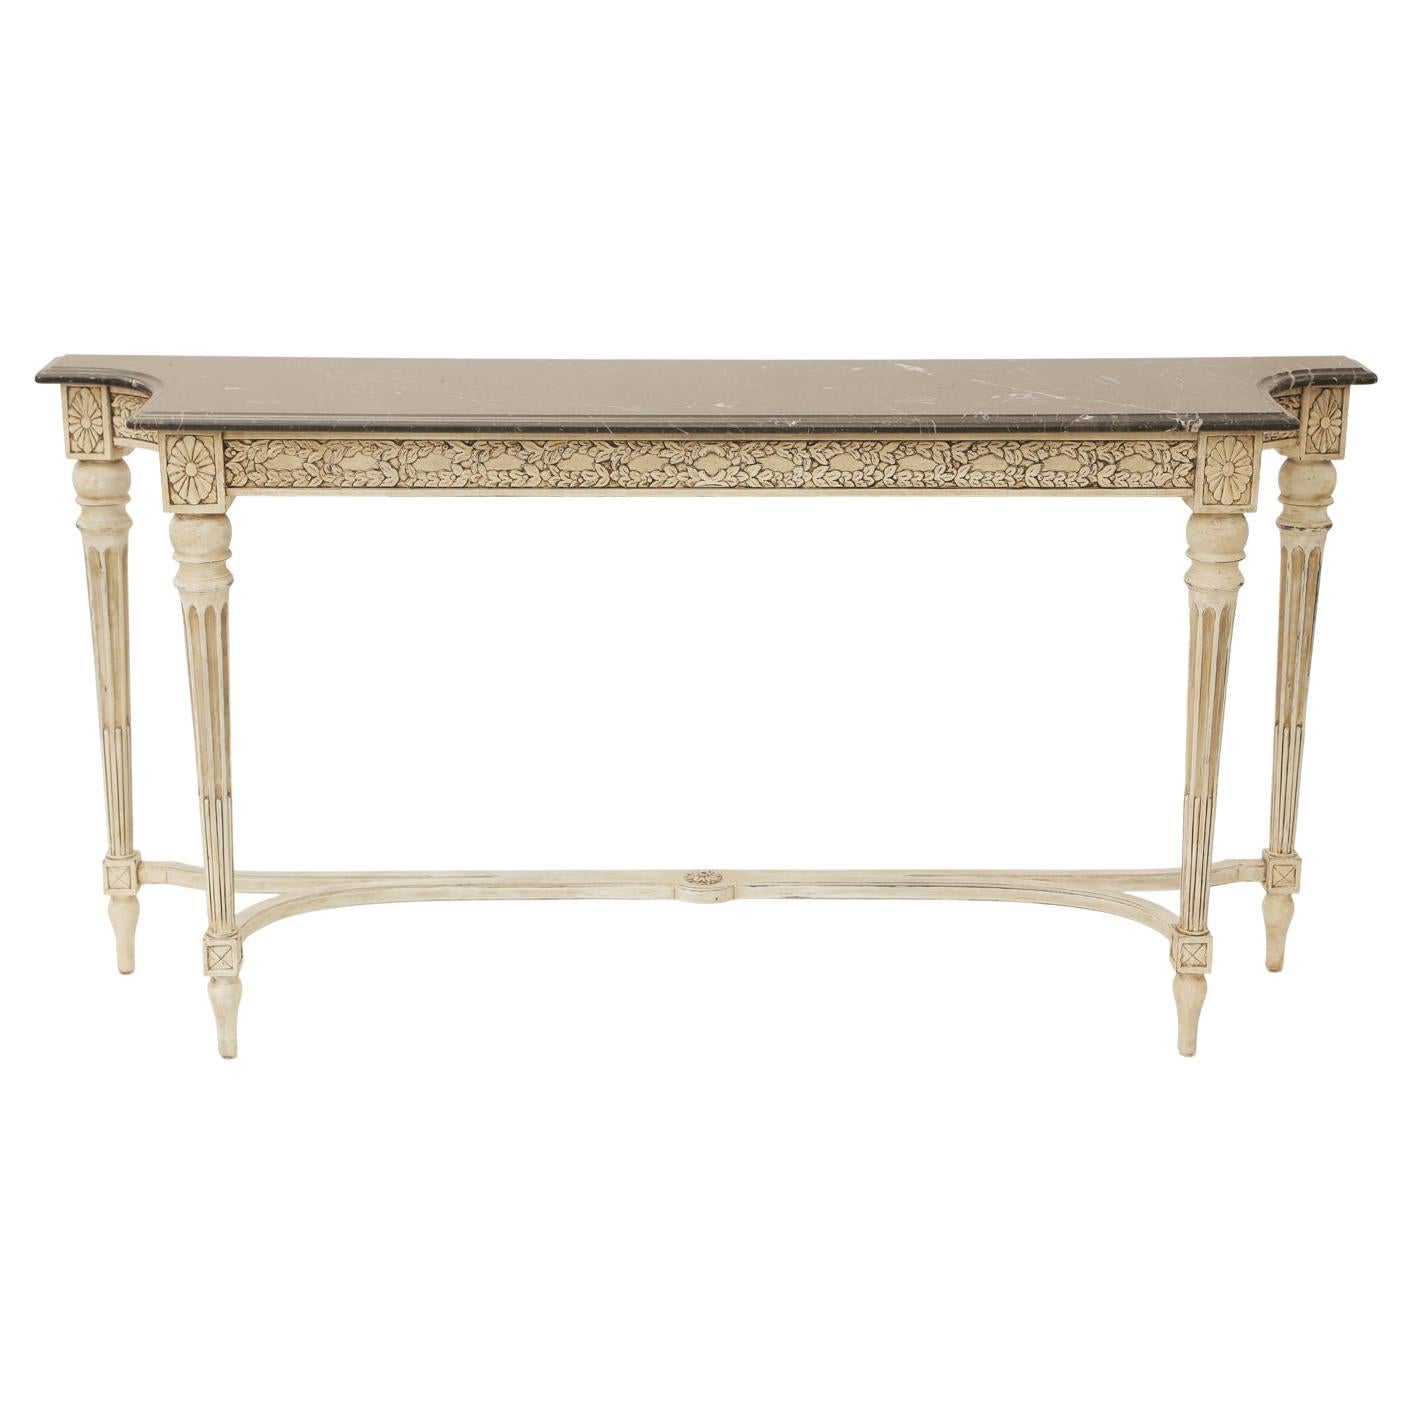 Narrow Louis XVI Style Console with Black Marble Top